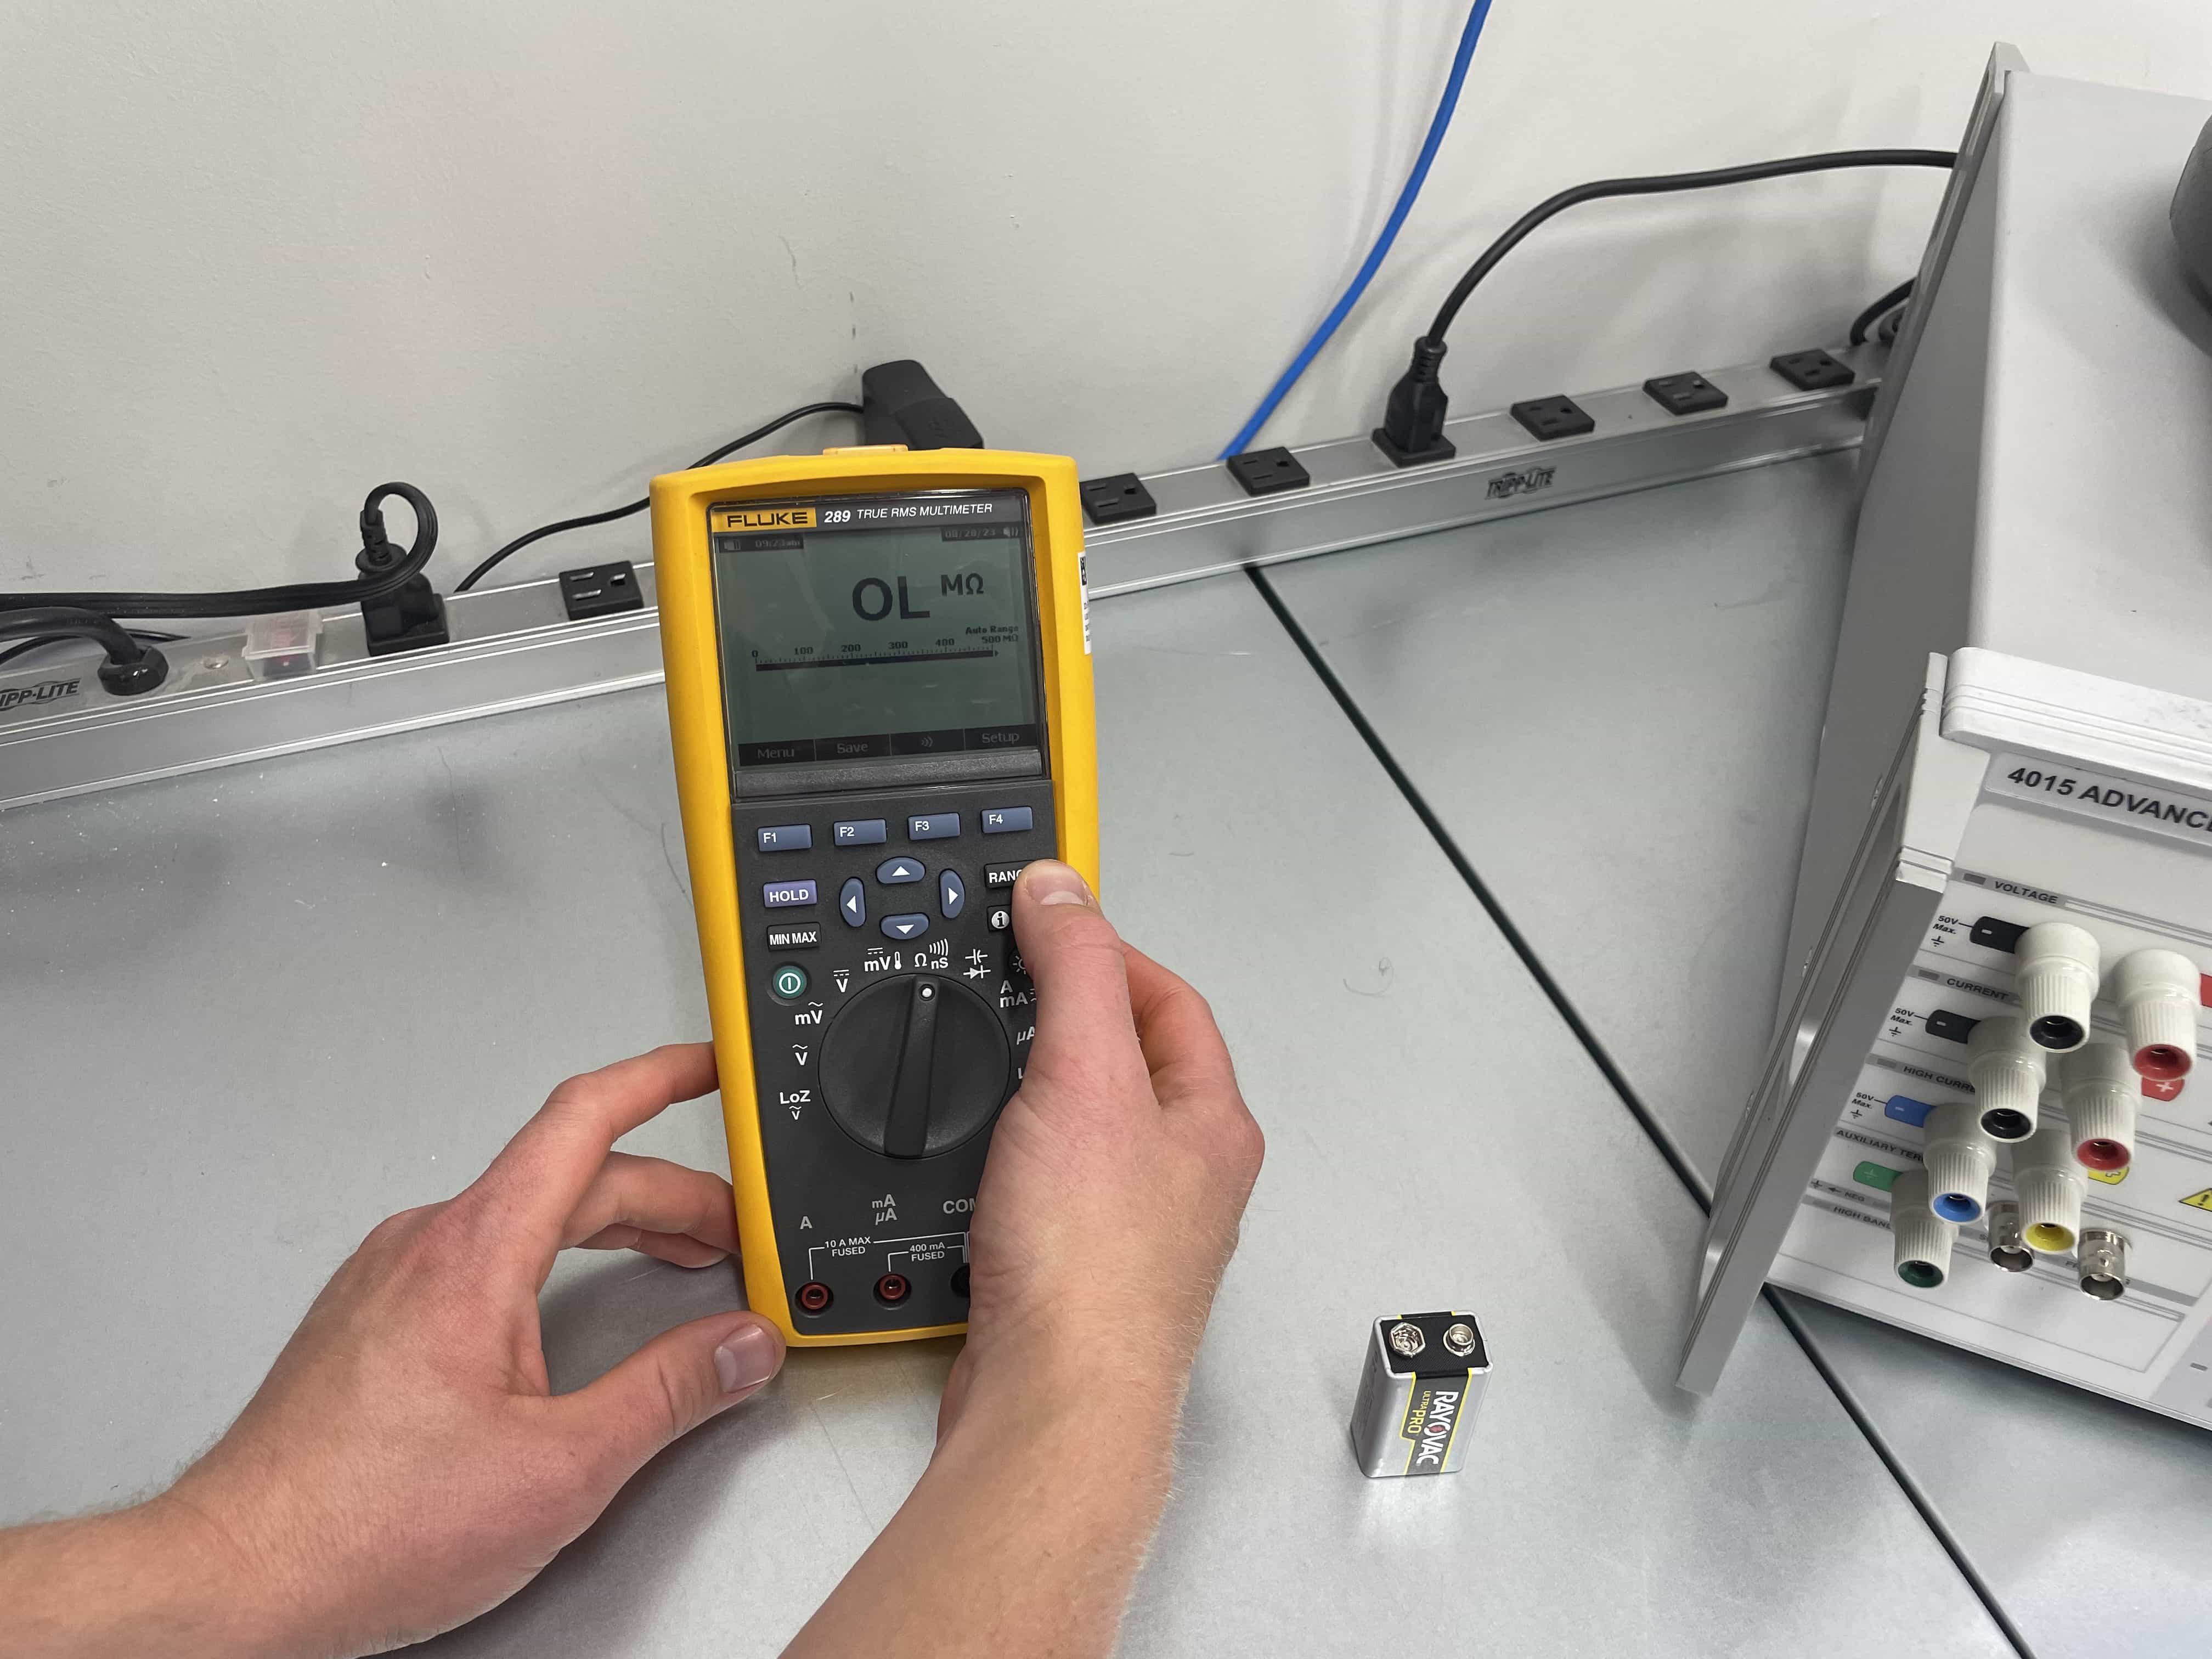 How to Use a Multimeter - Select Appropriate Range